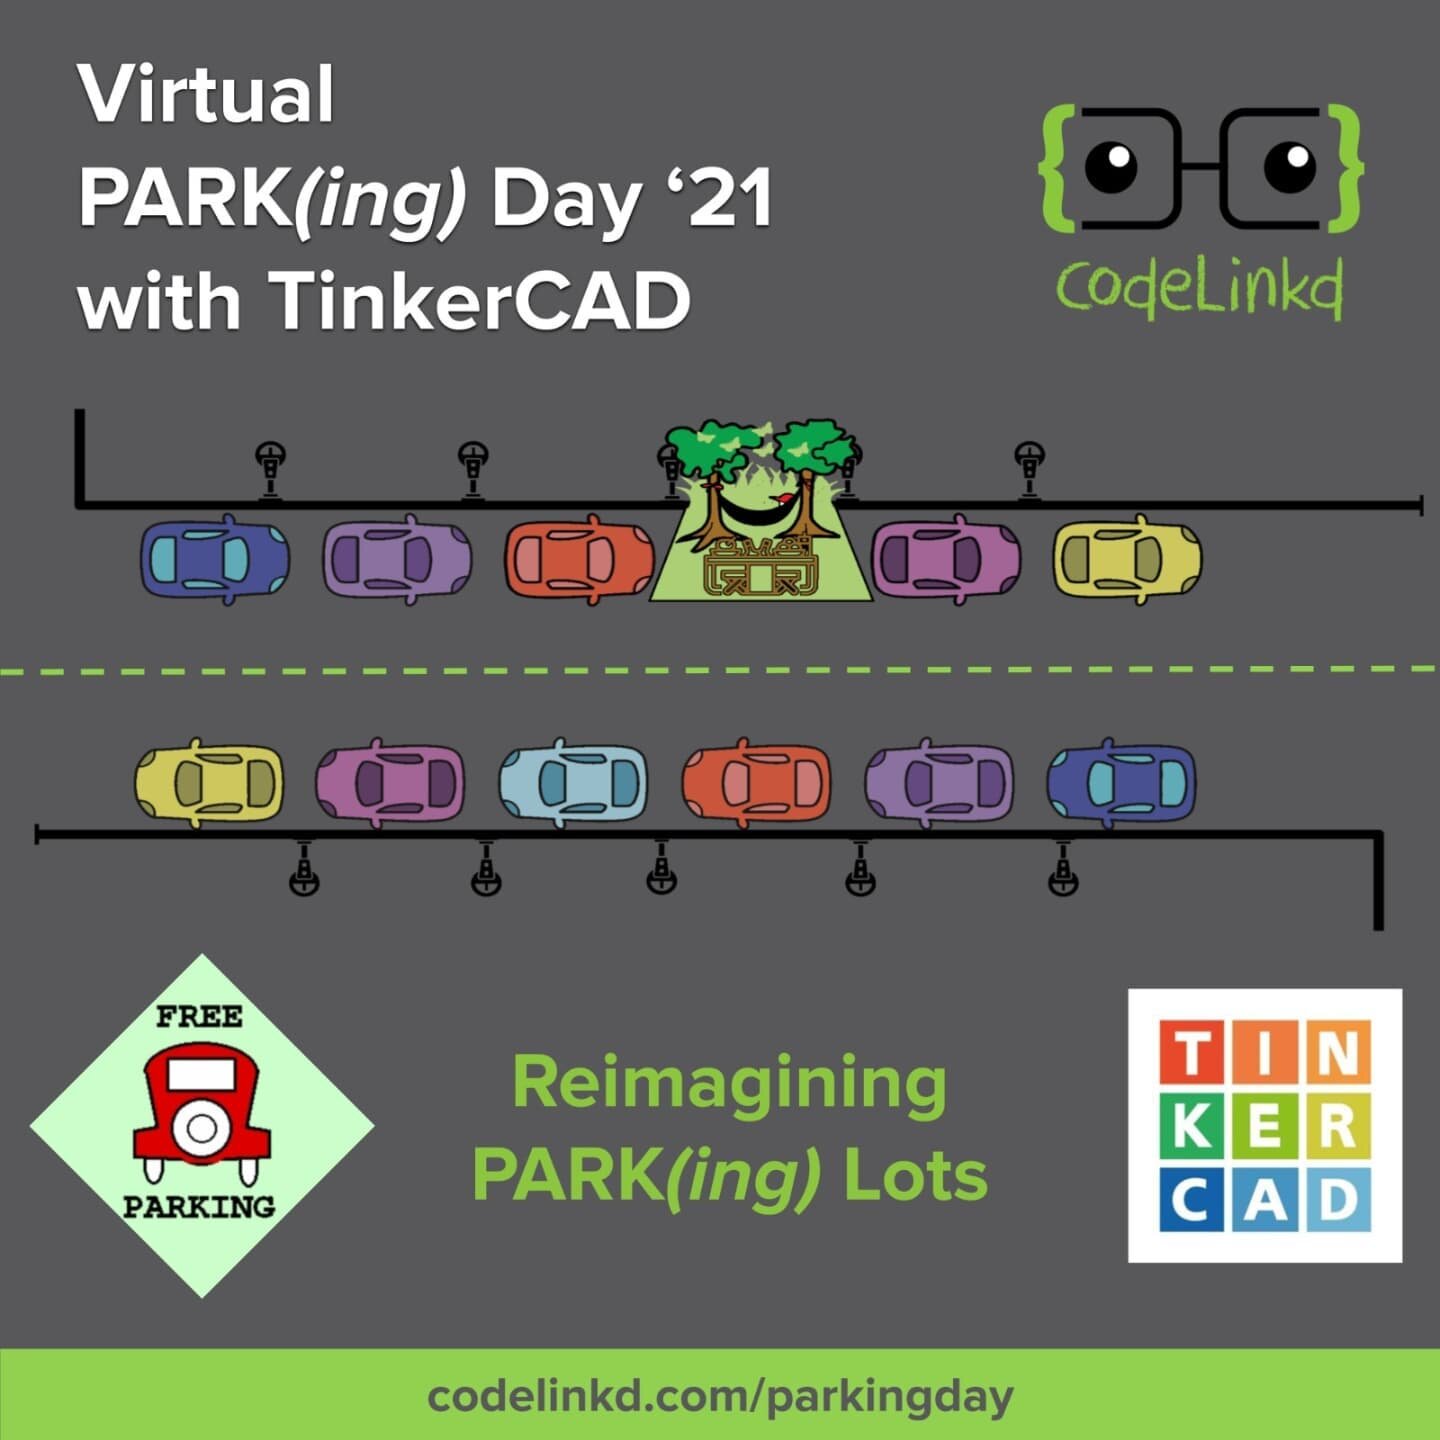 Virtual PARK(ing) Day 21' with TinkerCAD!!

Date: Saturday, September 18th, 2021
Time: 10 am - 12 noon PST
Venue: Zoom + TinkerCAD 

We welcome kids ages 8+ to come and join us for this fun and free event to park your creativity!!

Register your kids